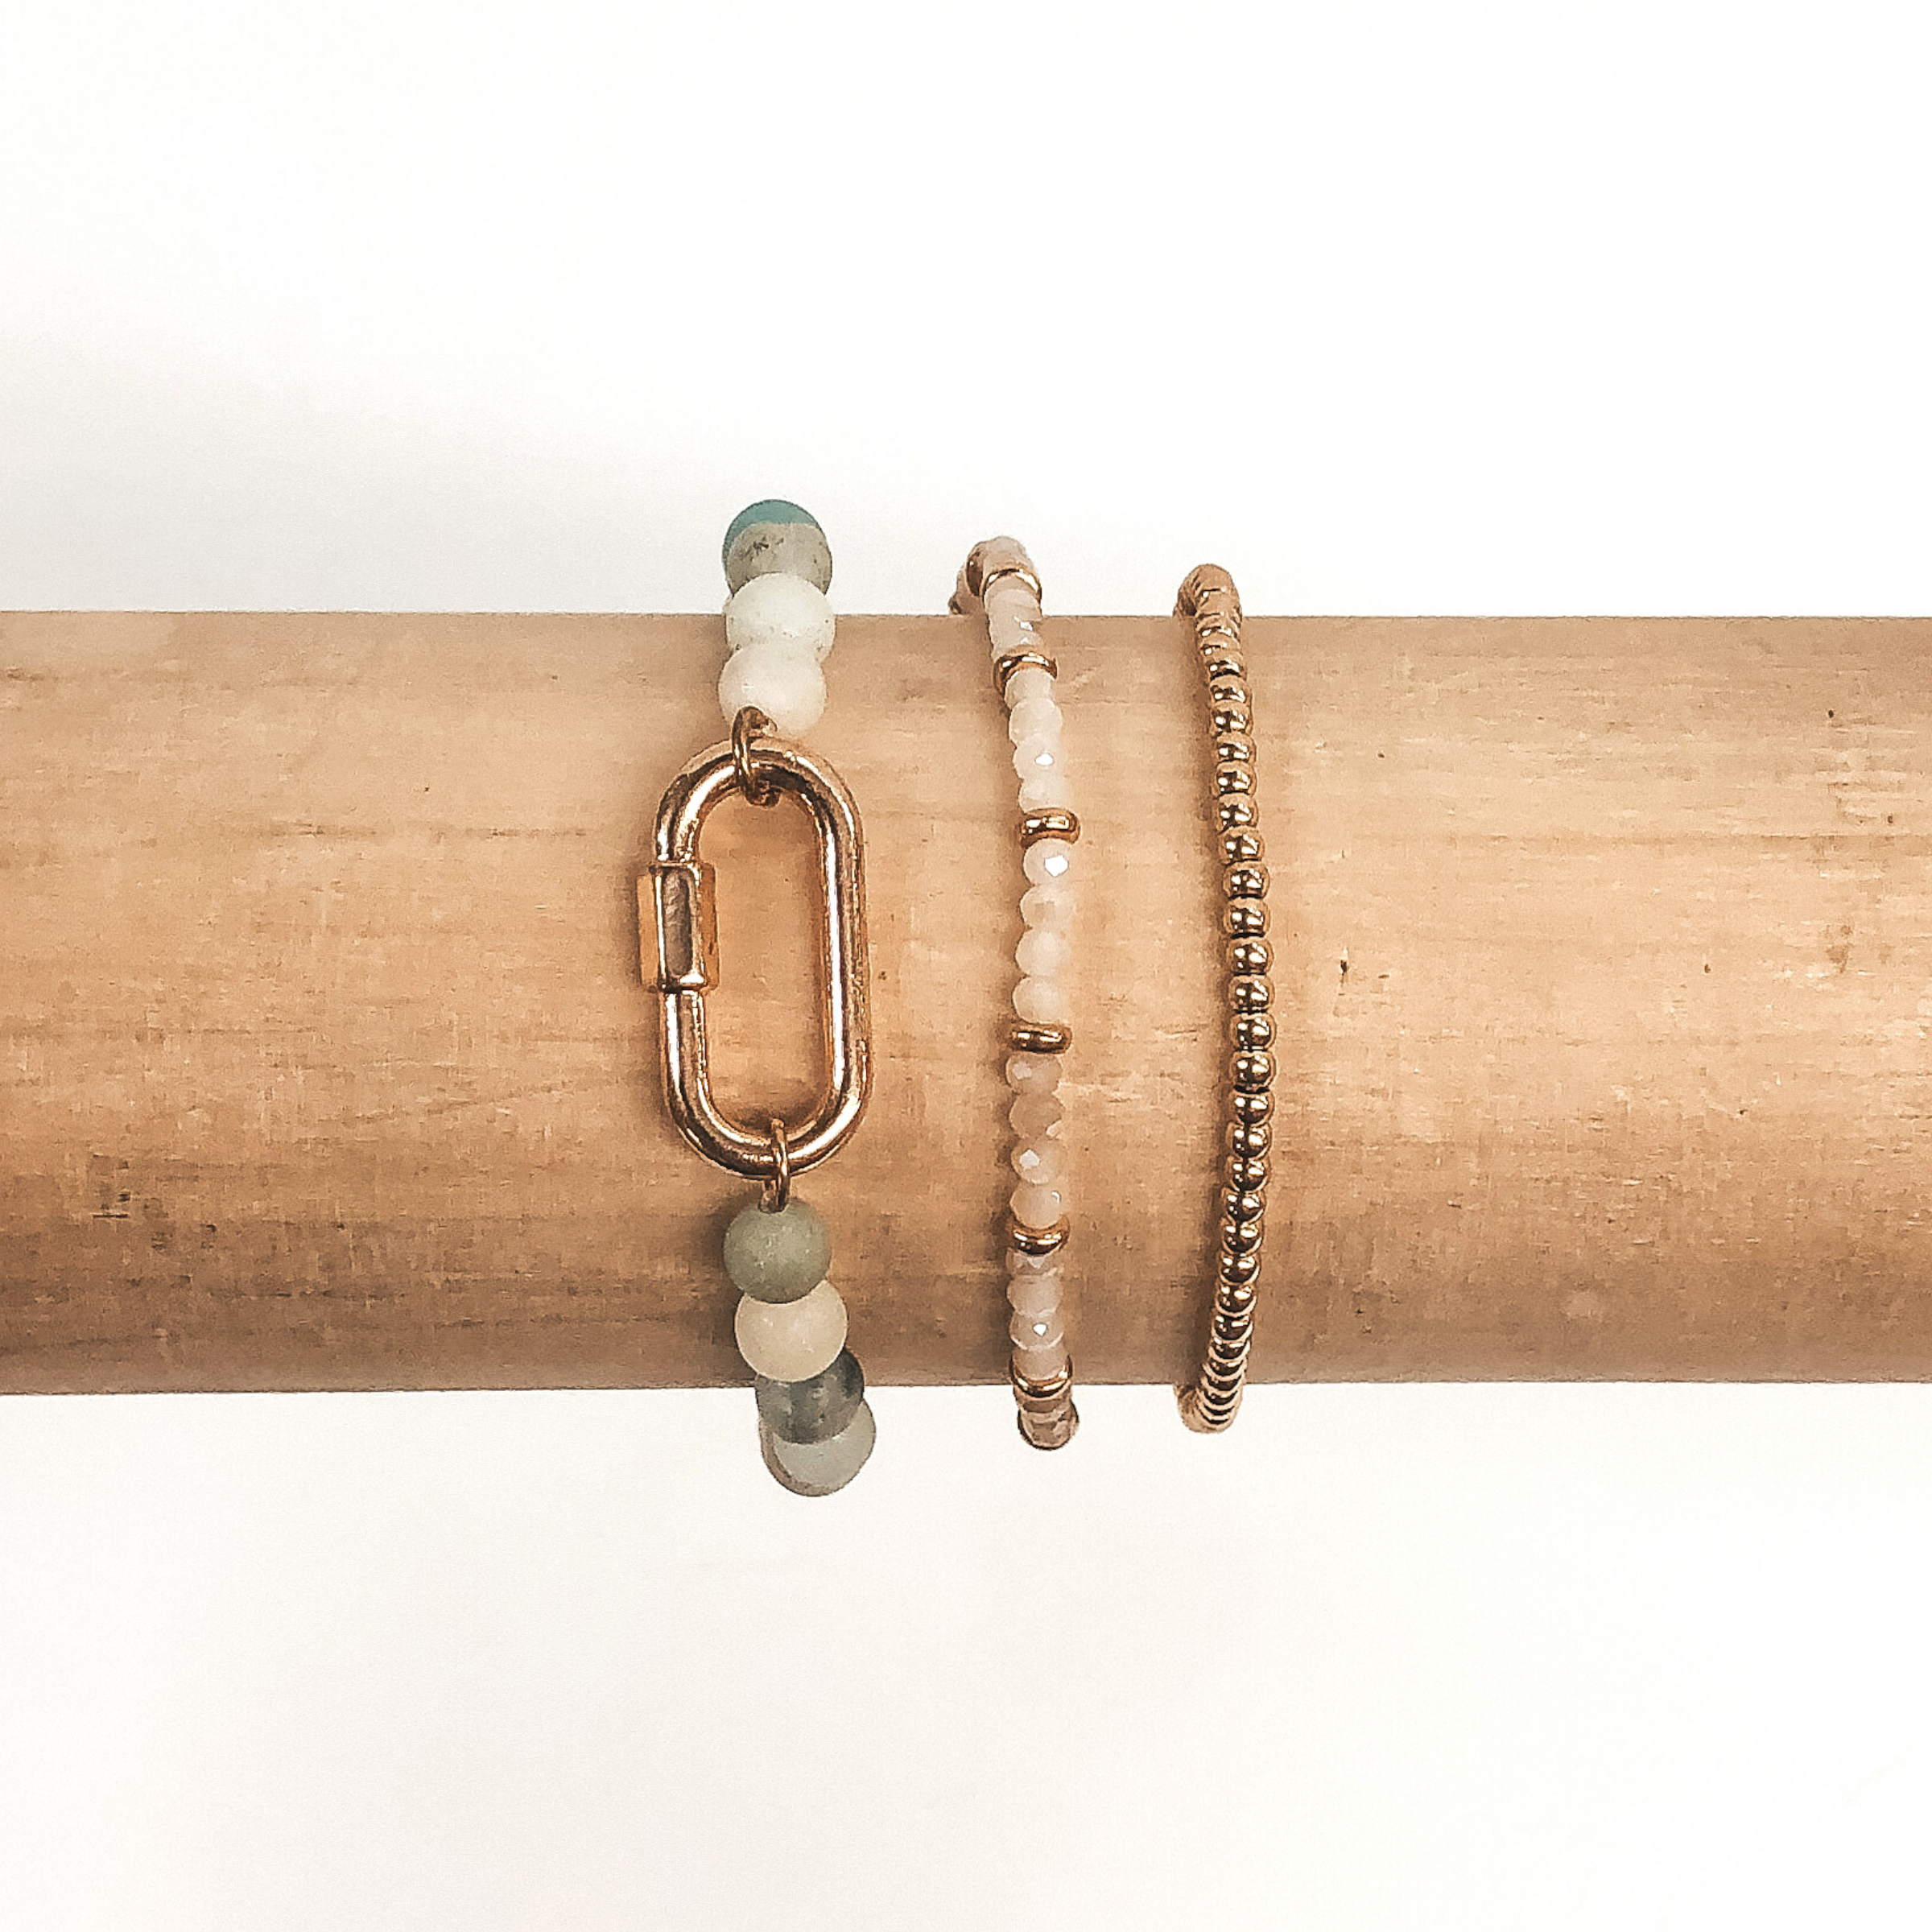 One bracelet is all gold beads, one bracelet light champagne beads and gold spacer beads, and the last bracelet has light mint marble beads with an oval pendant. These bracelets are pictured on a wood colored bracelet holder on a white background. 